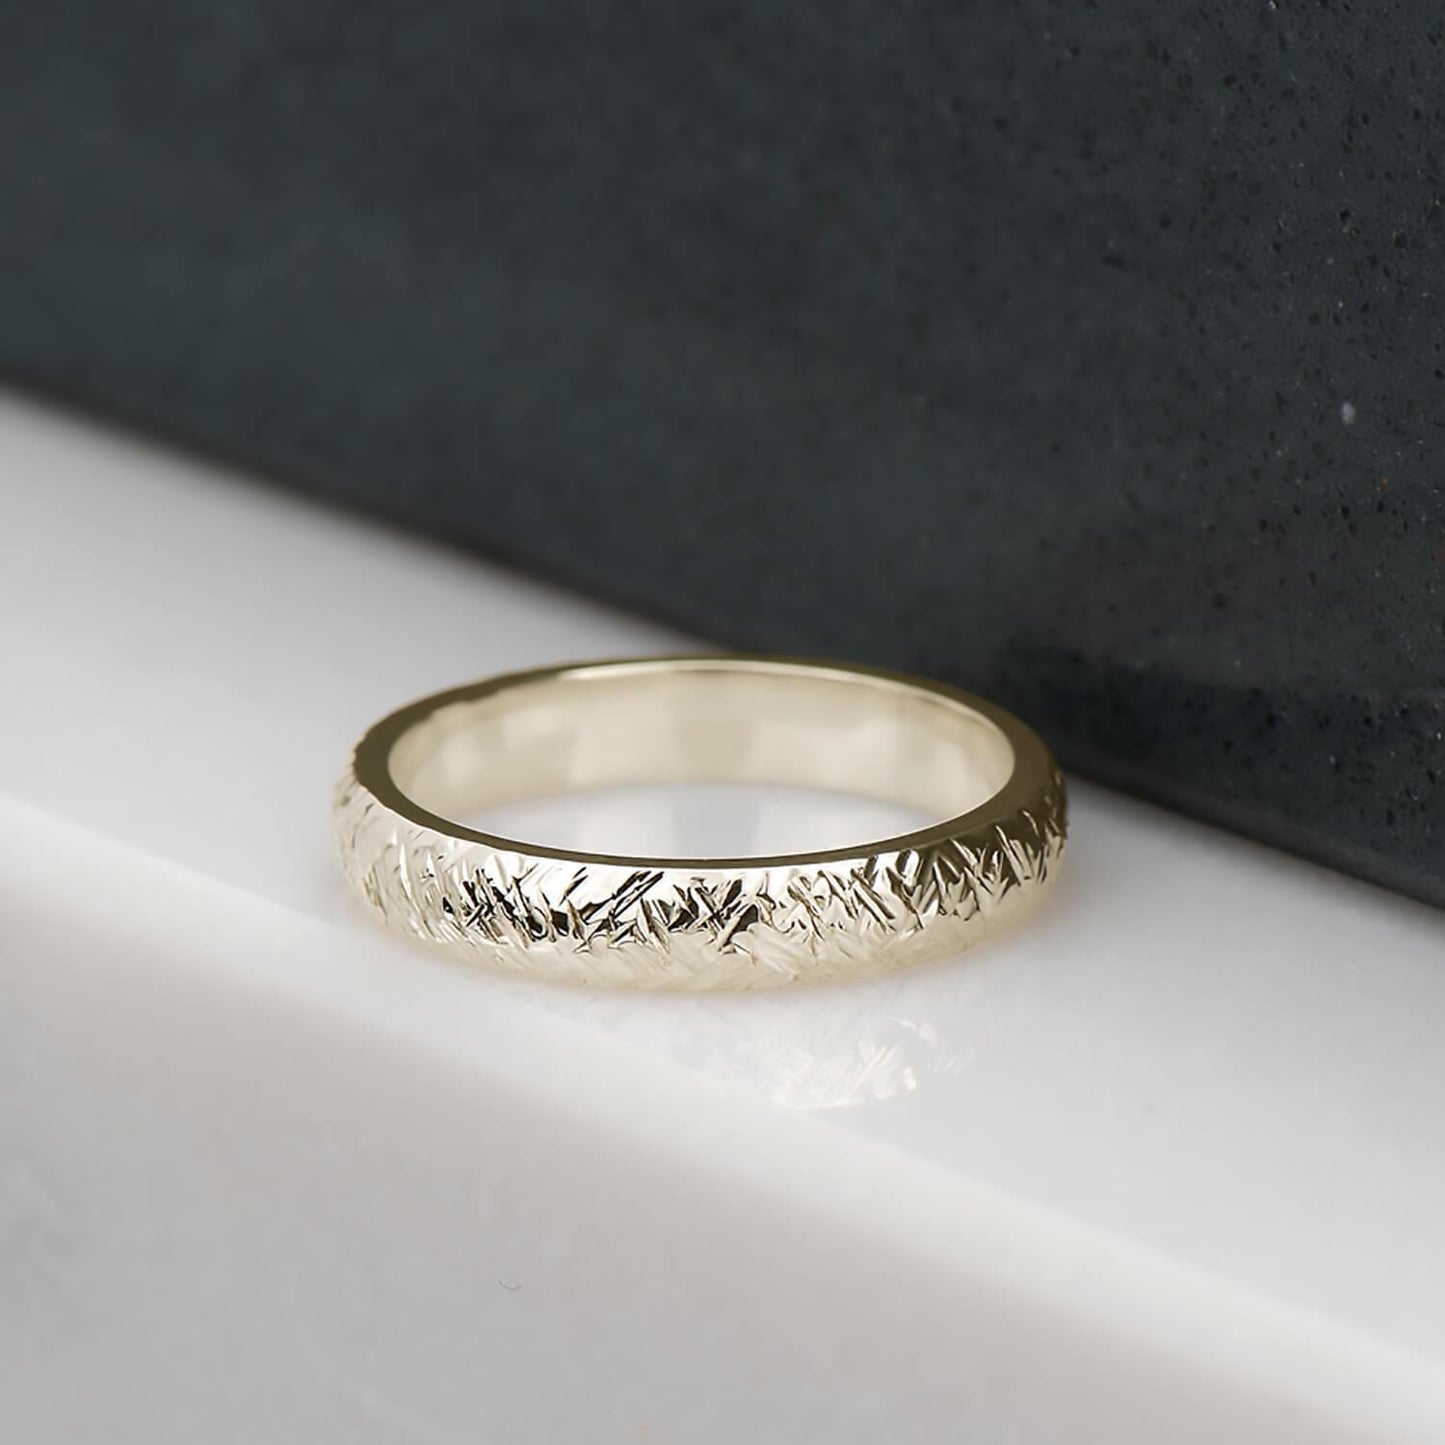 Cross hatch hammer textured and polished ring in recycled 14 karat yellow gold.